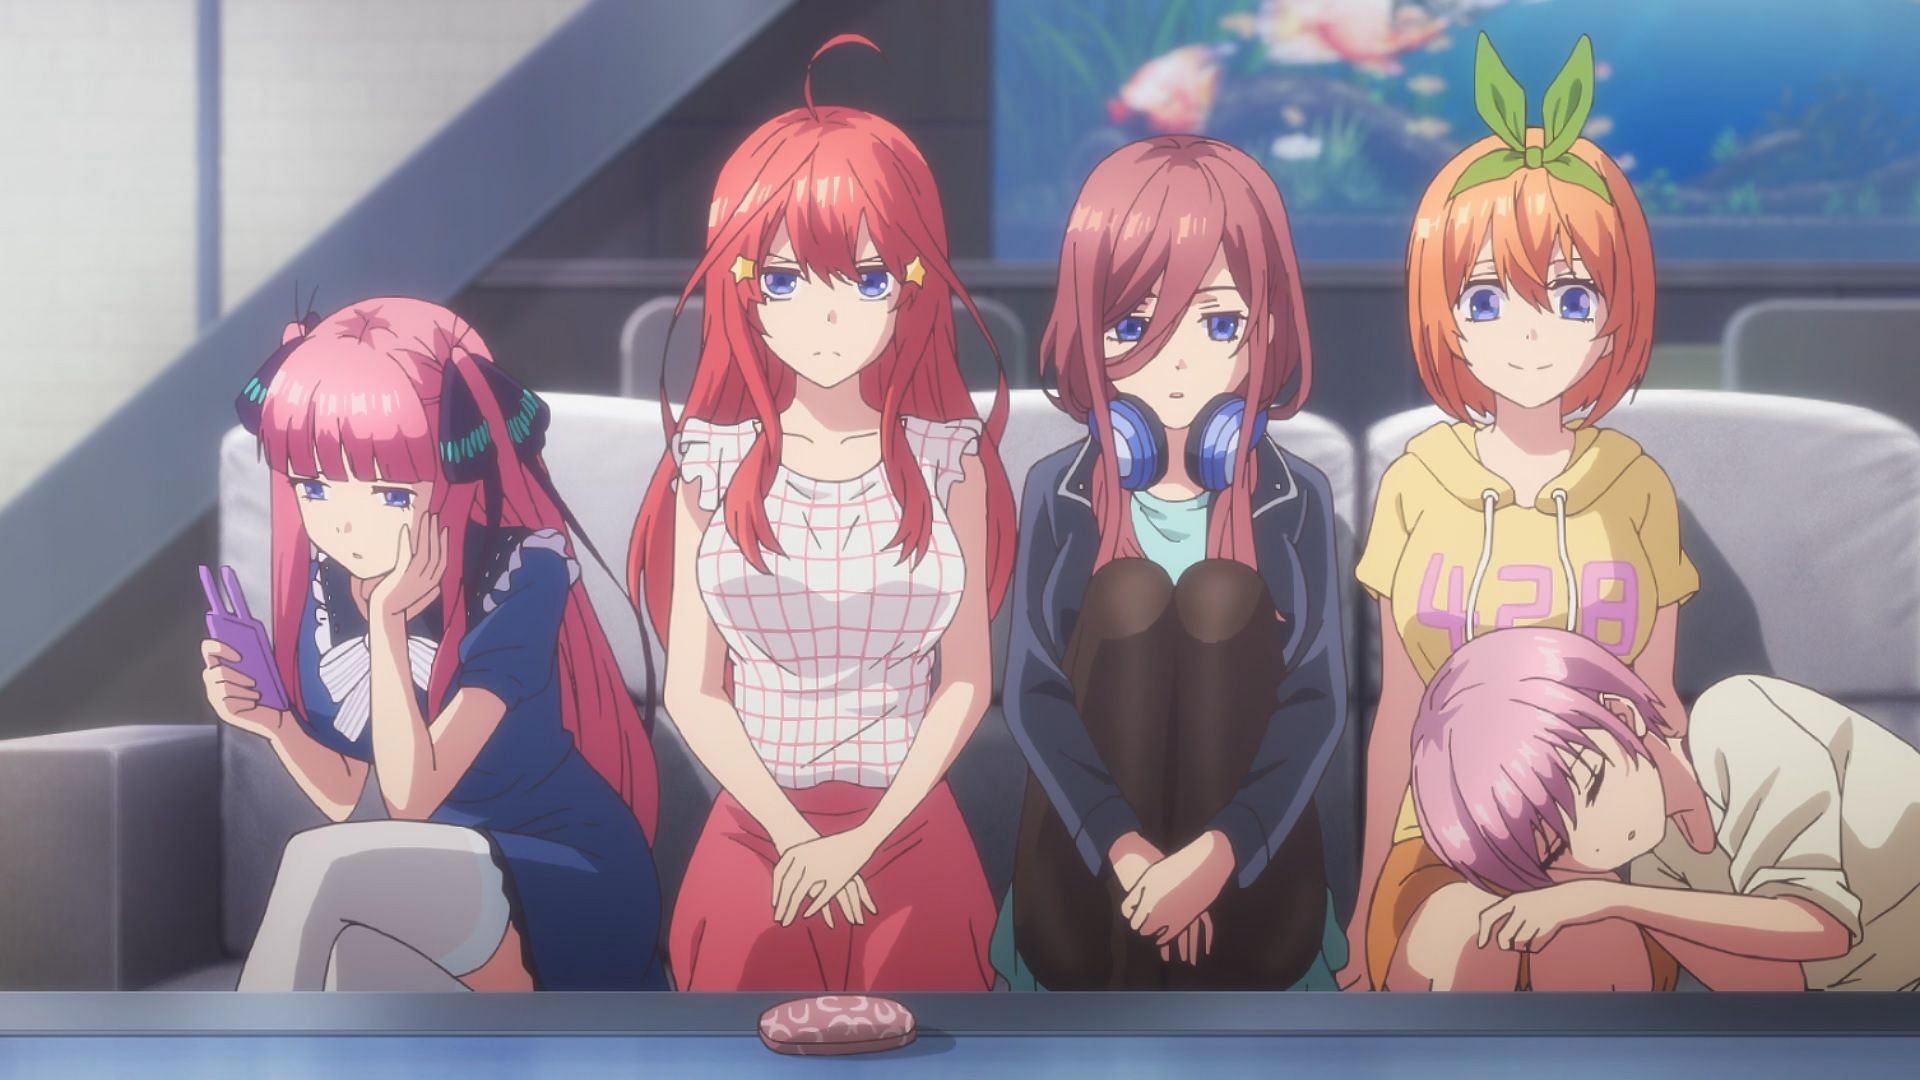 The Quintessential Quintuplets∽ Anime Special Premieres on